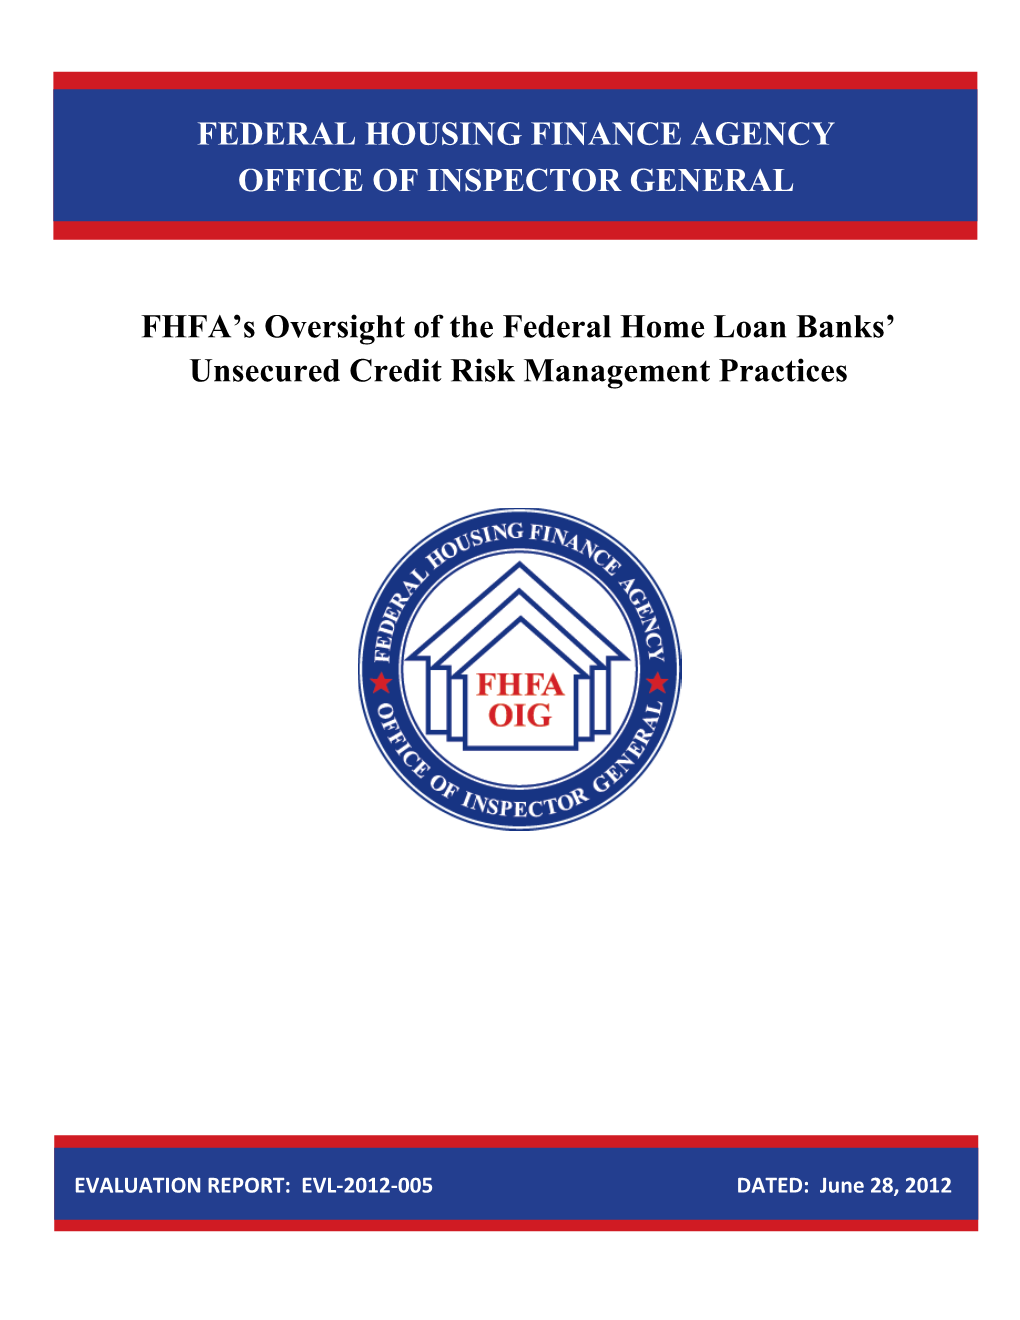 FHFA's Oversight of the Federal Home Loan Banks' Unsecured